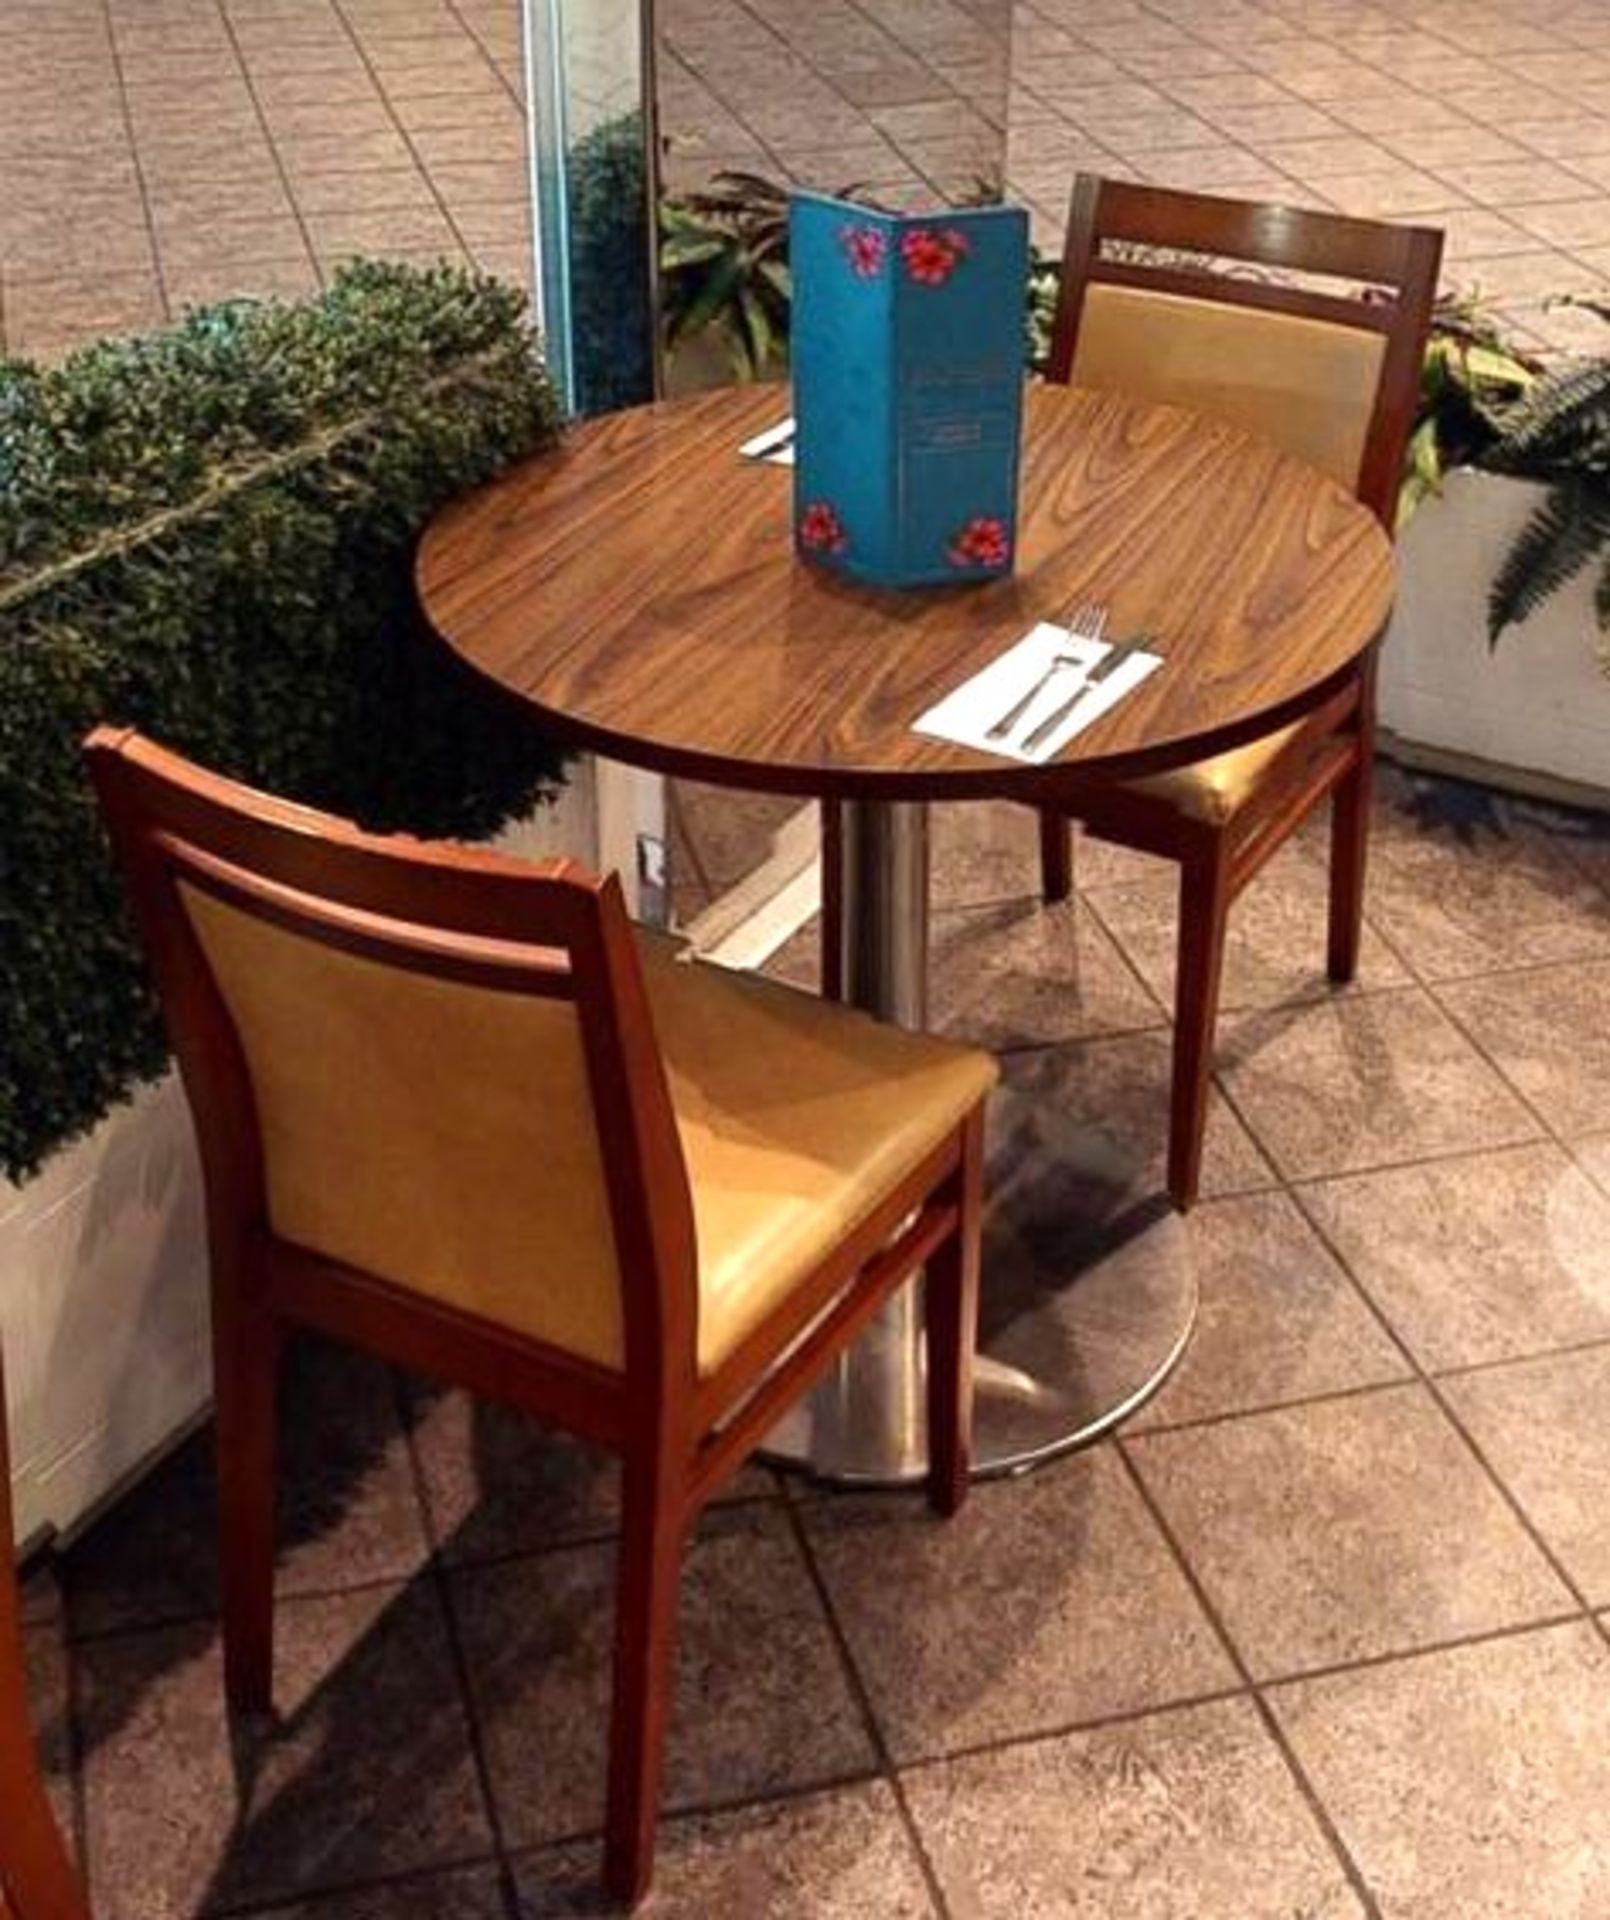 16 x High Quality Restaurant Chairs With Wooden Frames and Leather Seat Pads - Image 4 of 4